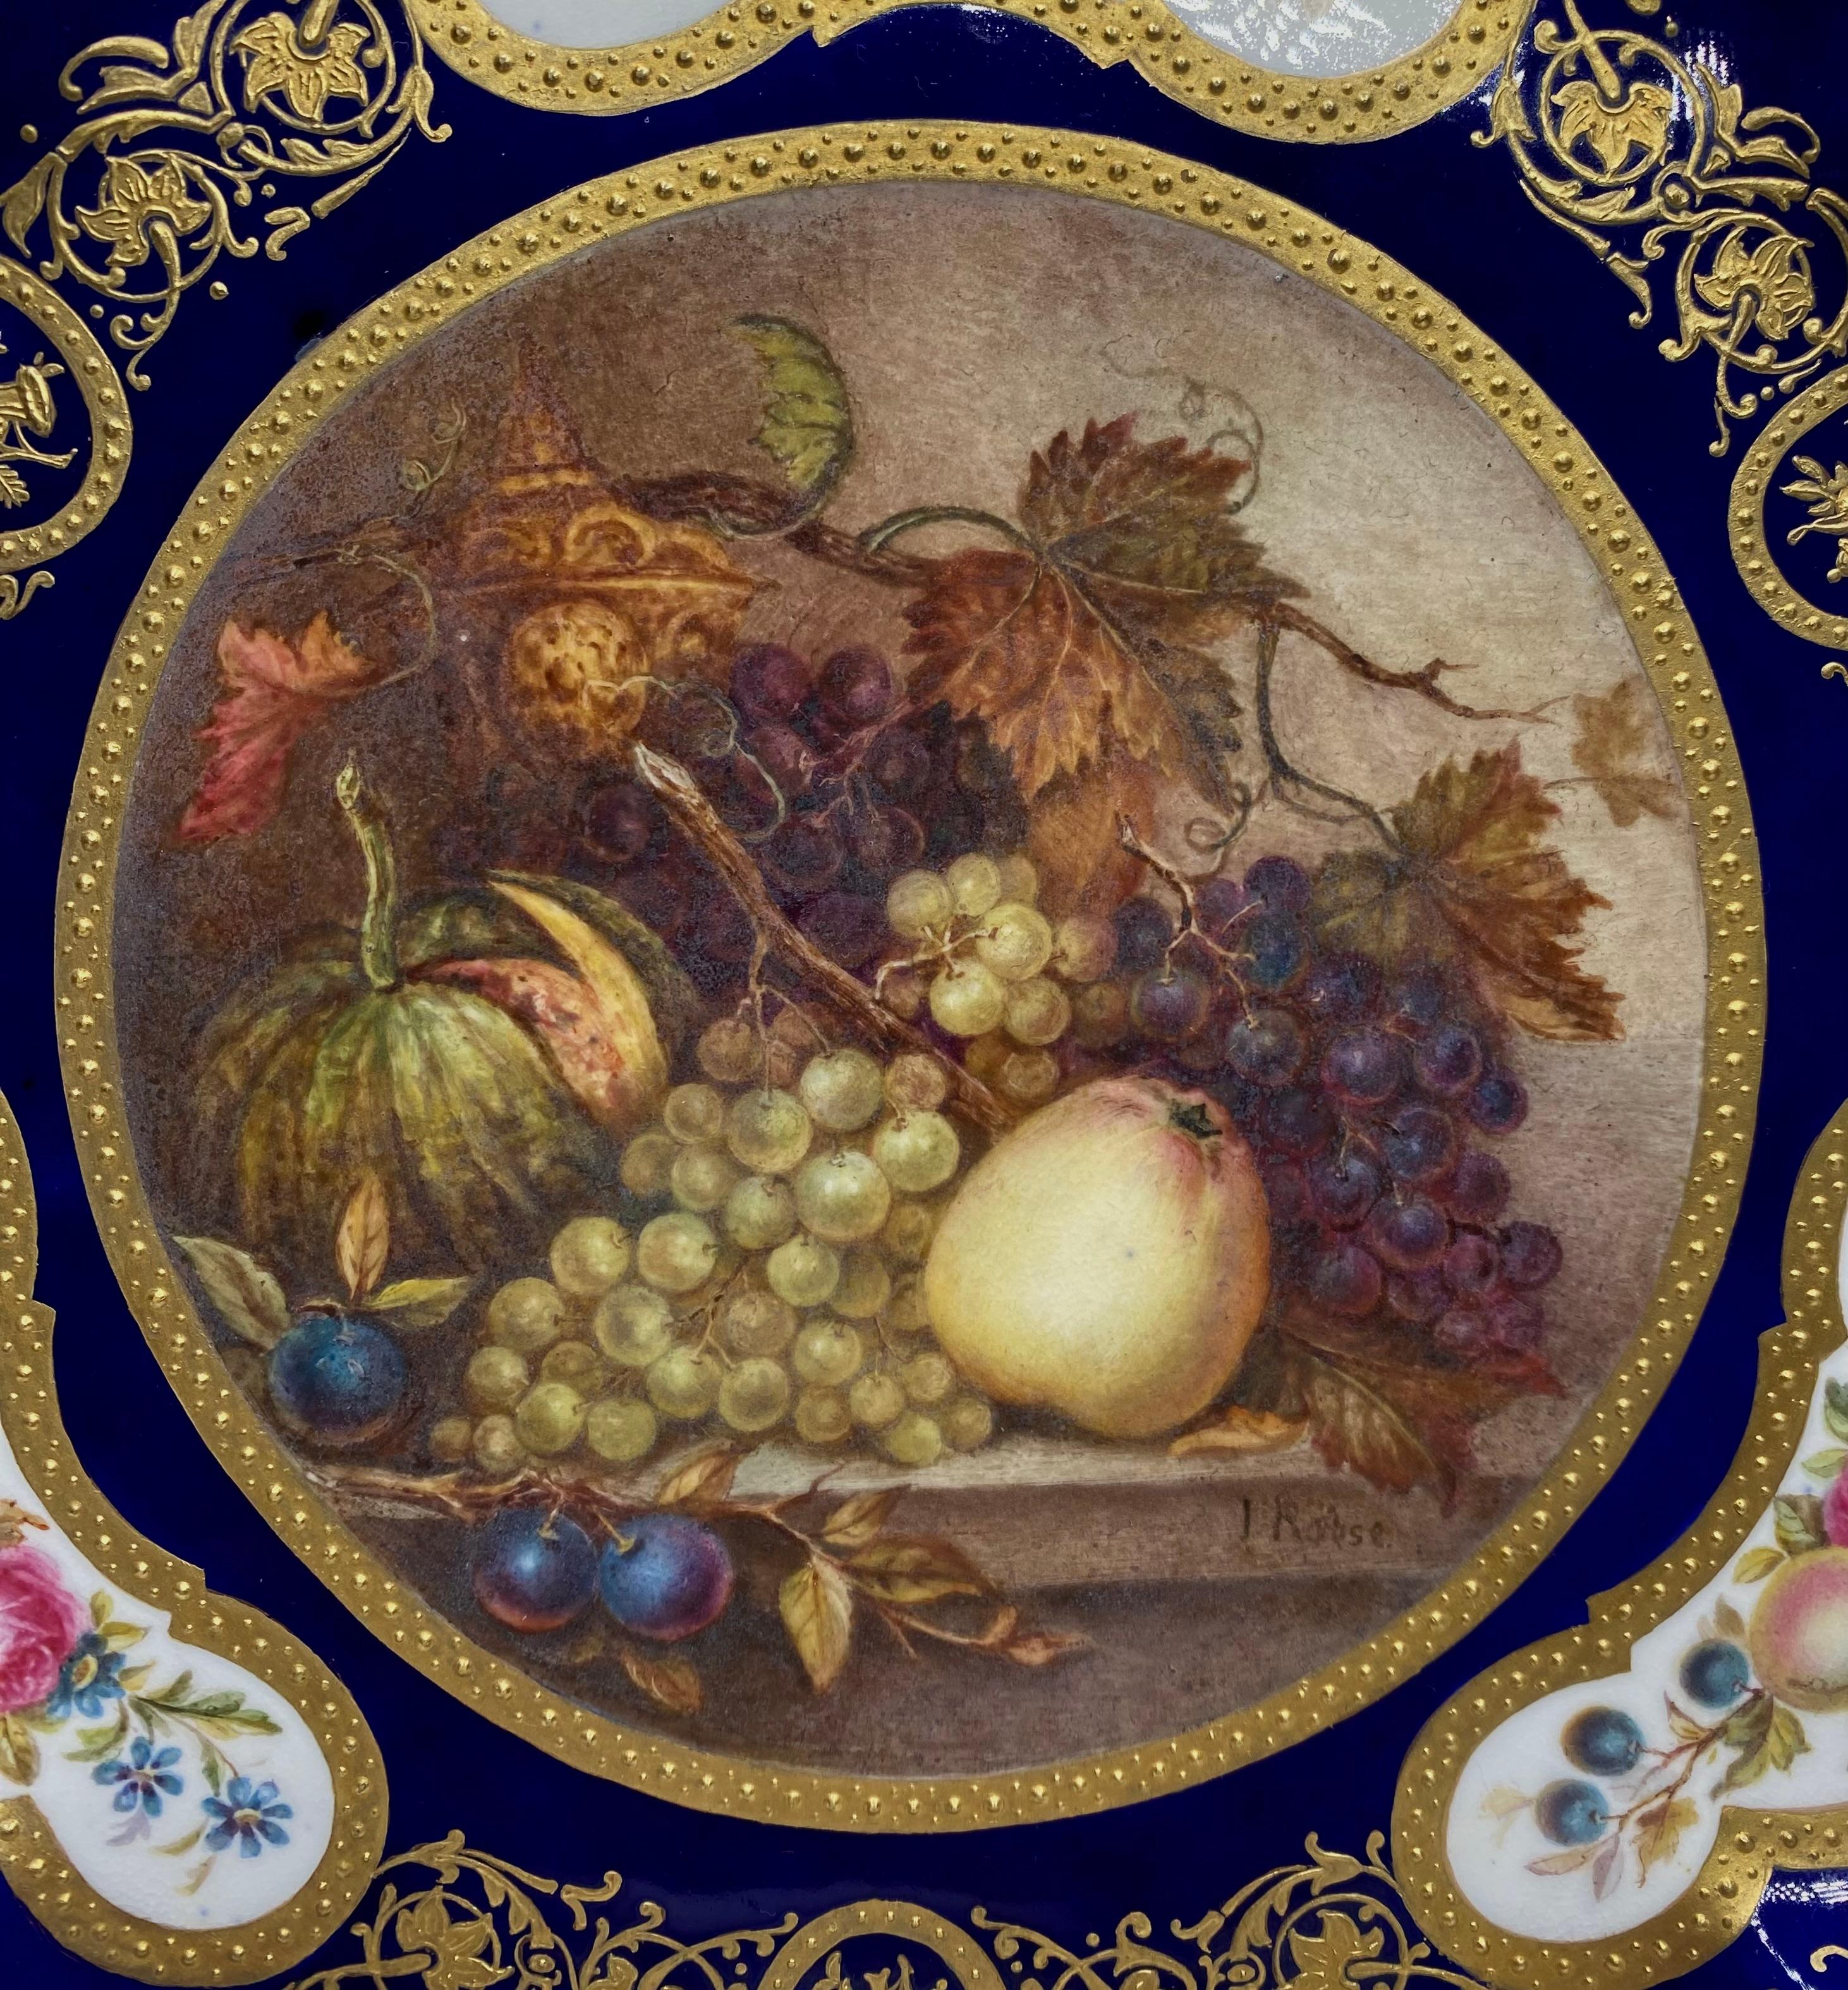 A fine English porcelain plate, painted by James Rouse jnr. c. 1880. Beautifully painted by this exceptional artist, with a circular panel containing a still life of fruit, and a gilt bronze vase, resting upon a marble ledge.
The border with three